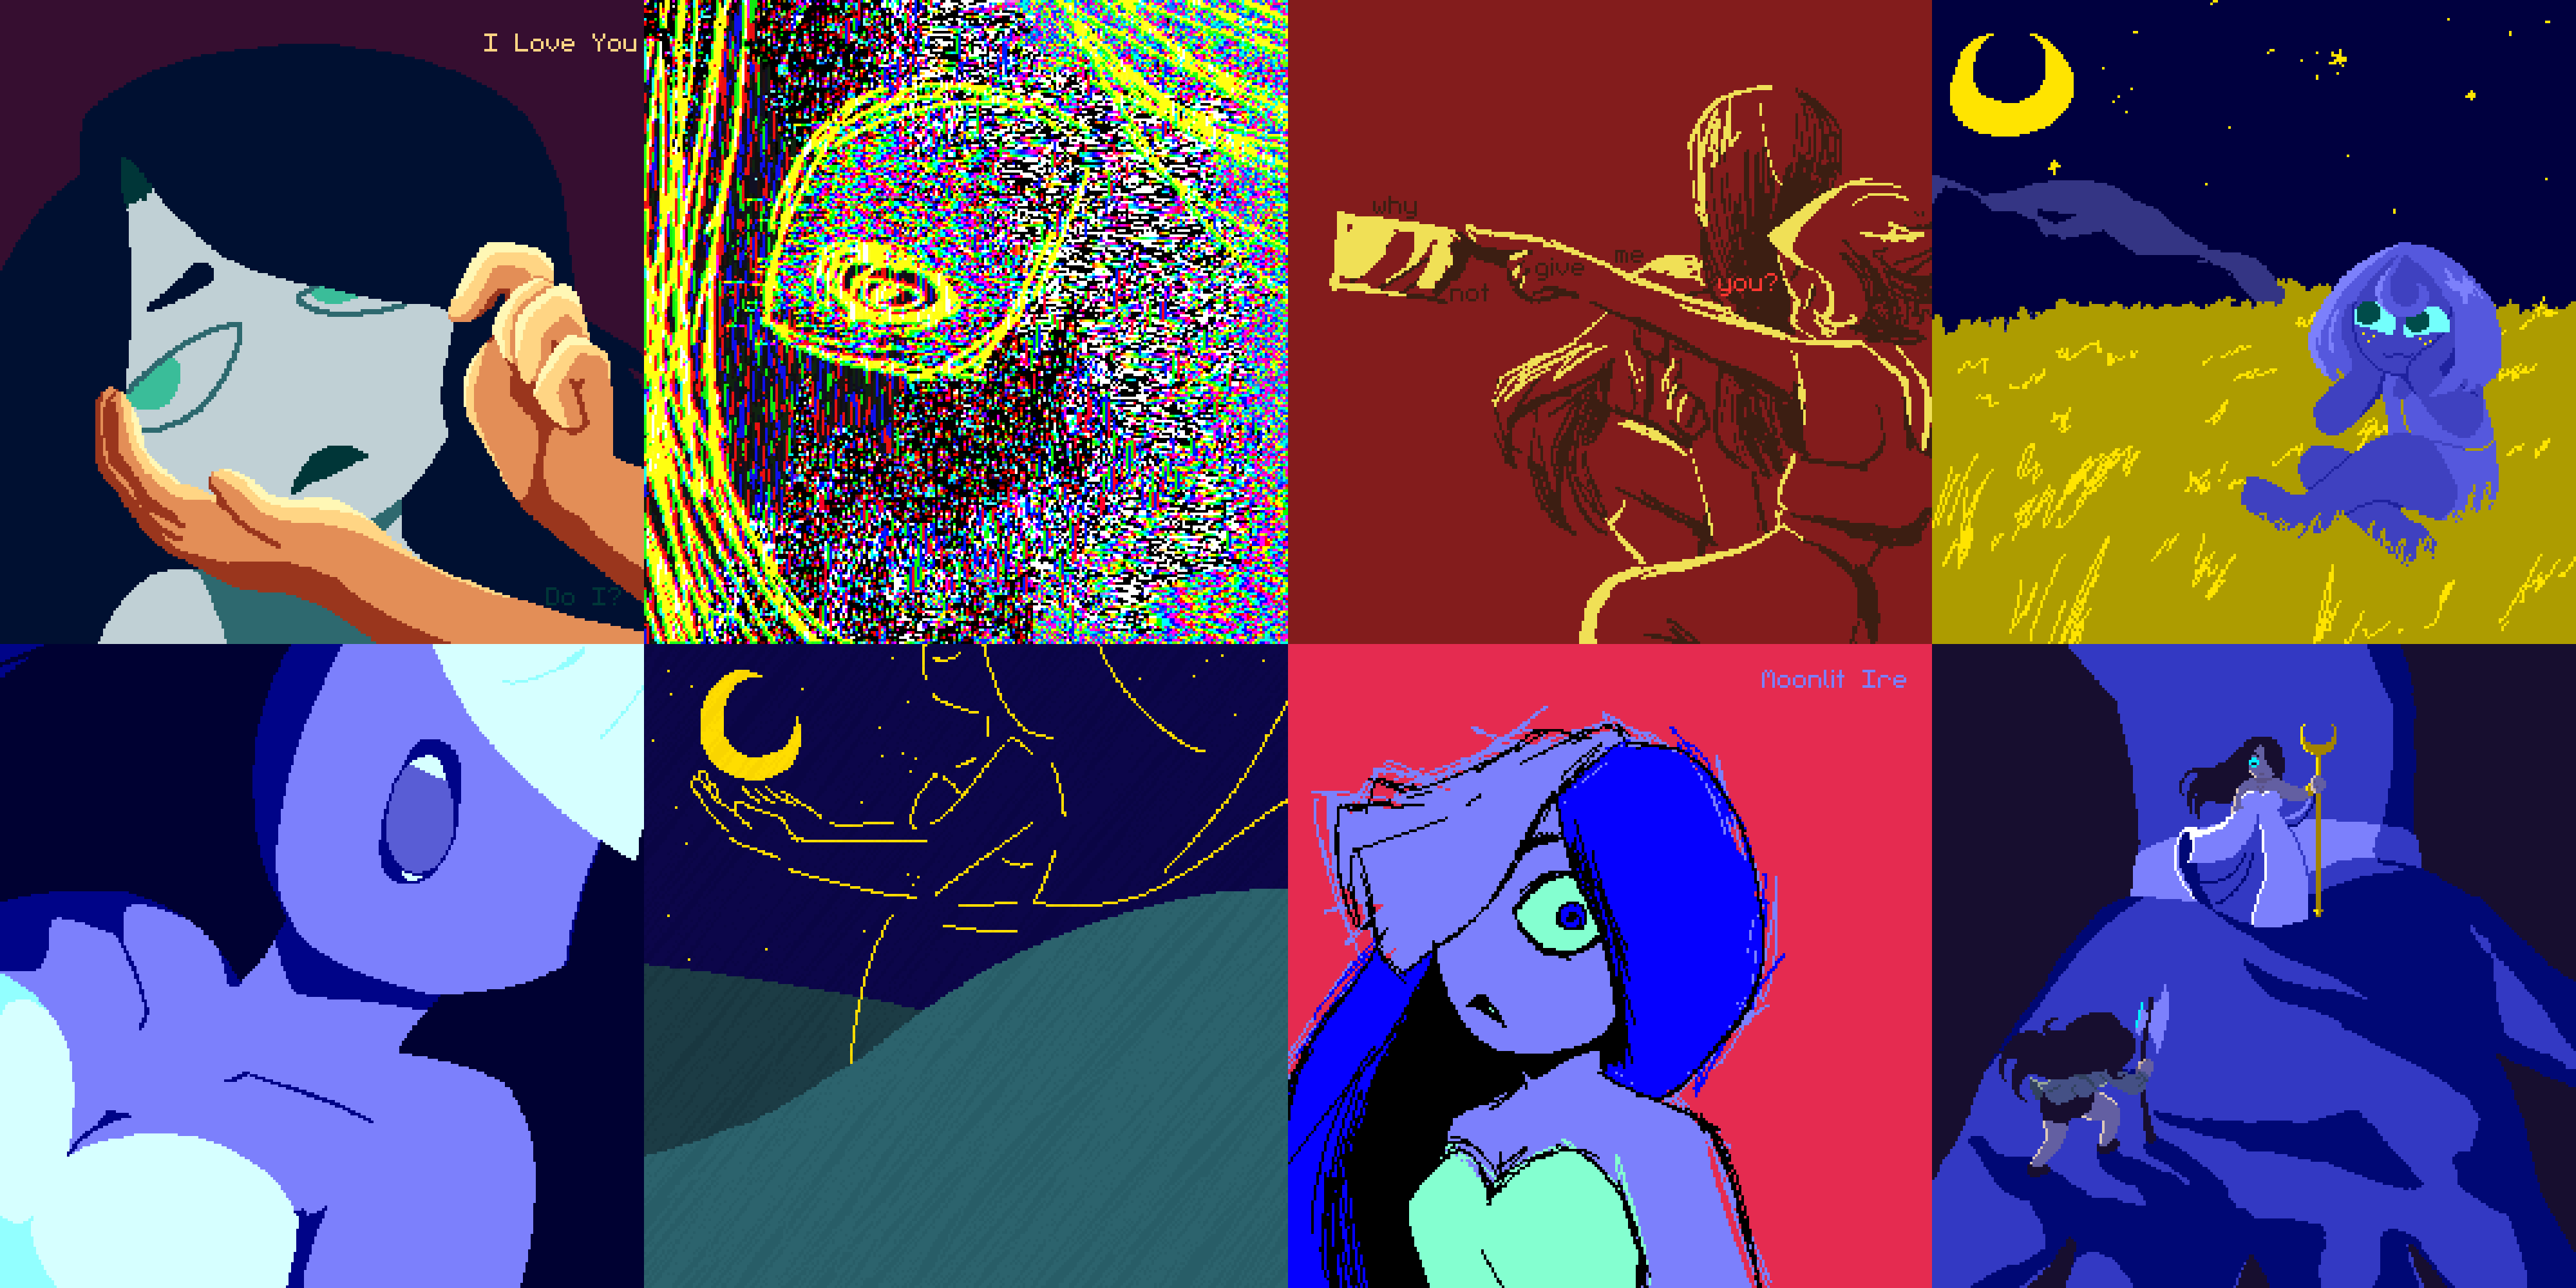 Examples of limited palette pieces